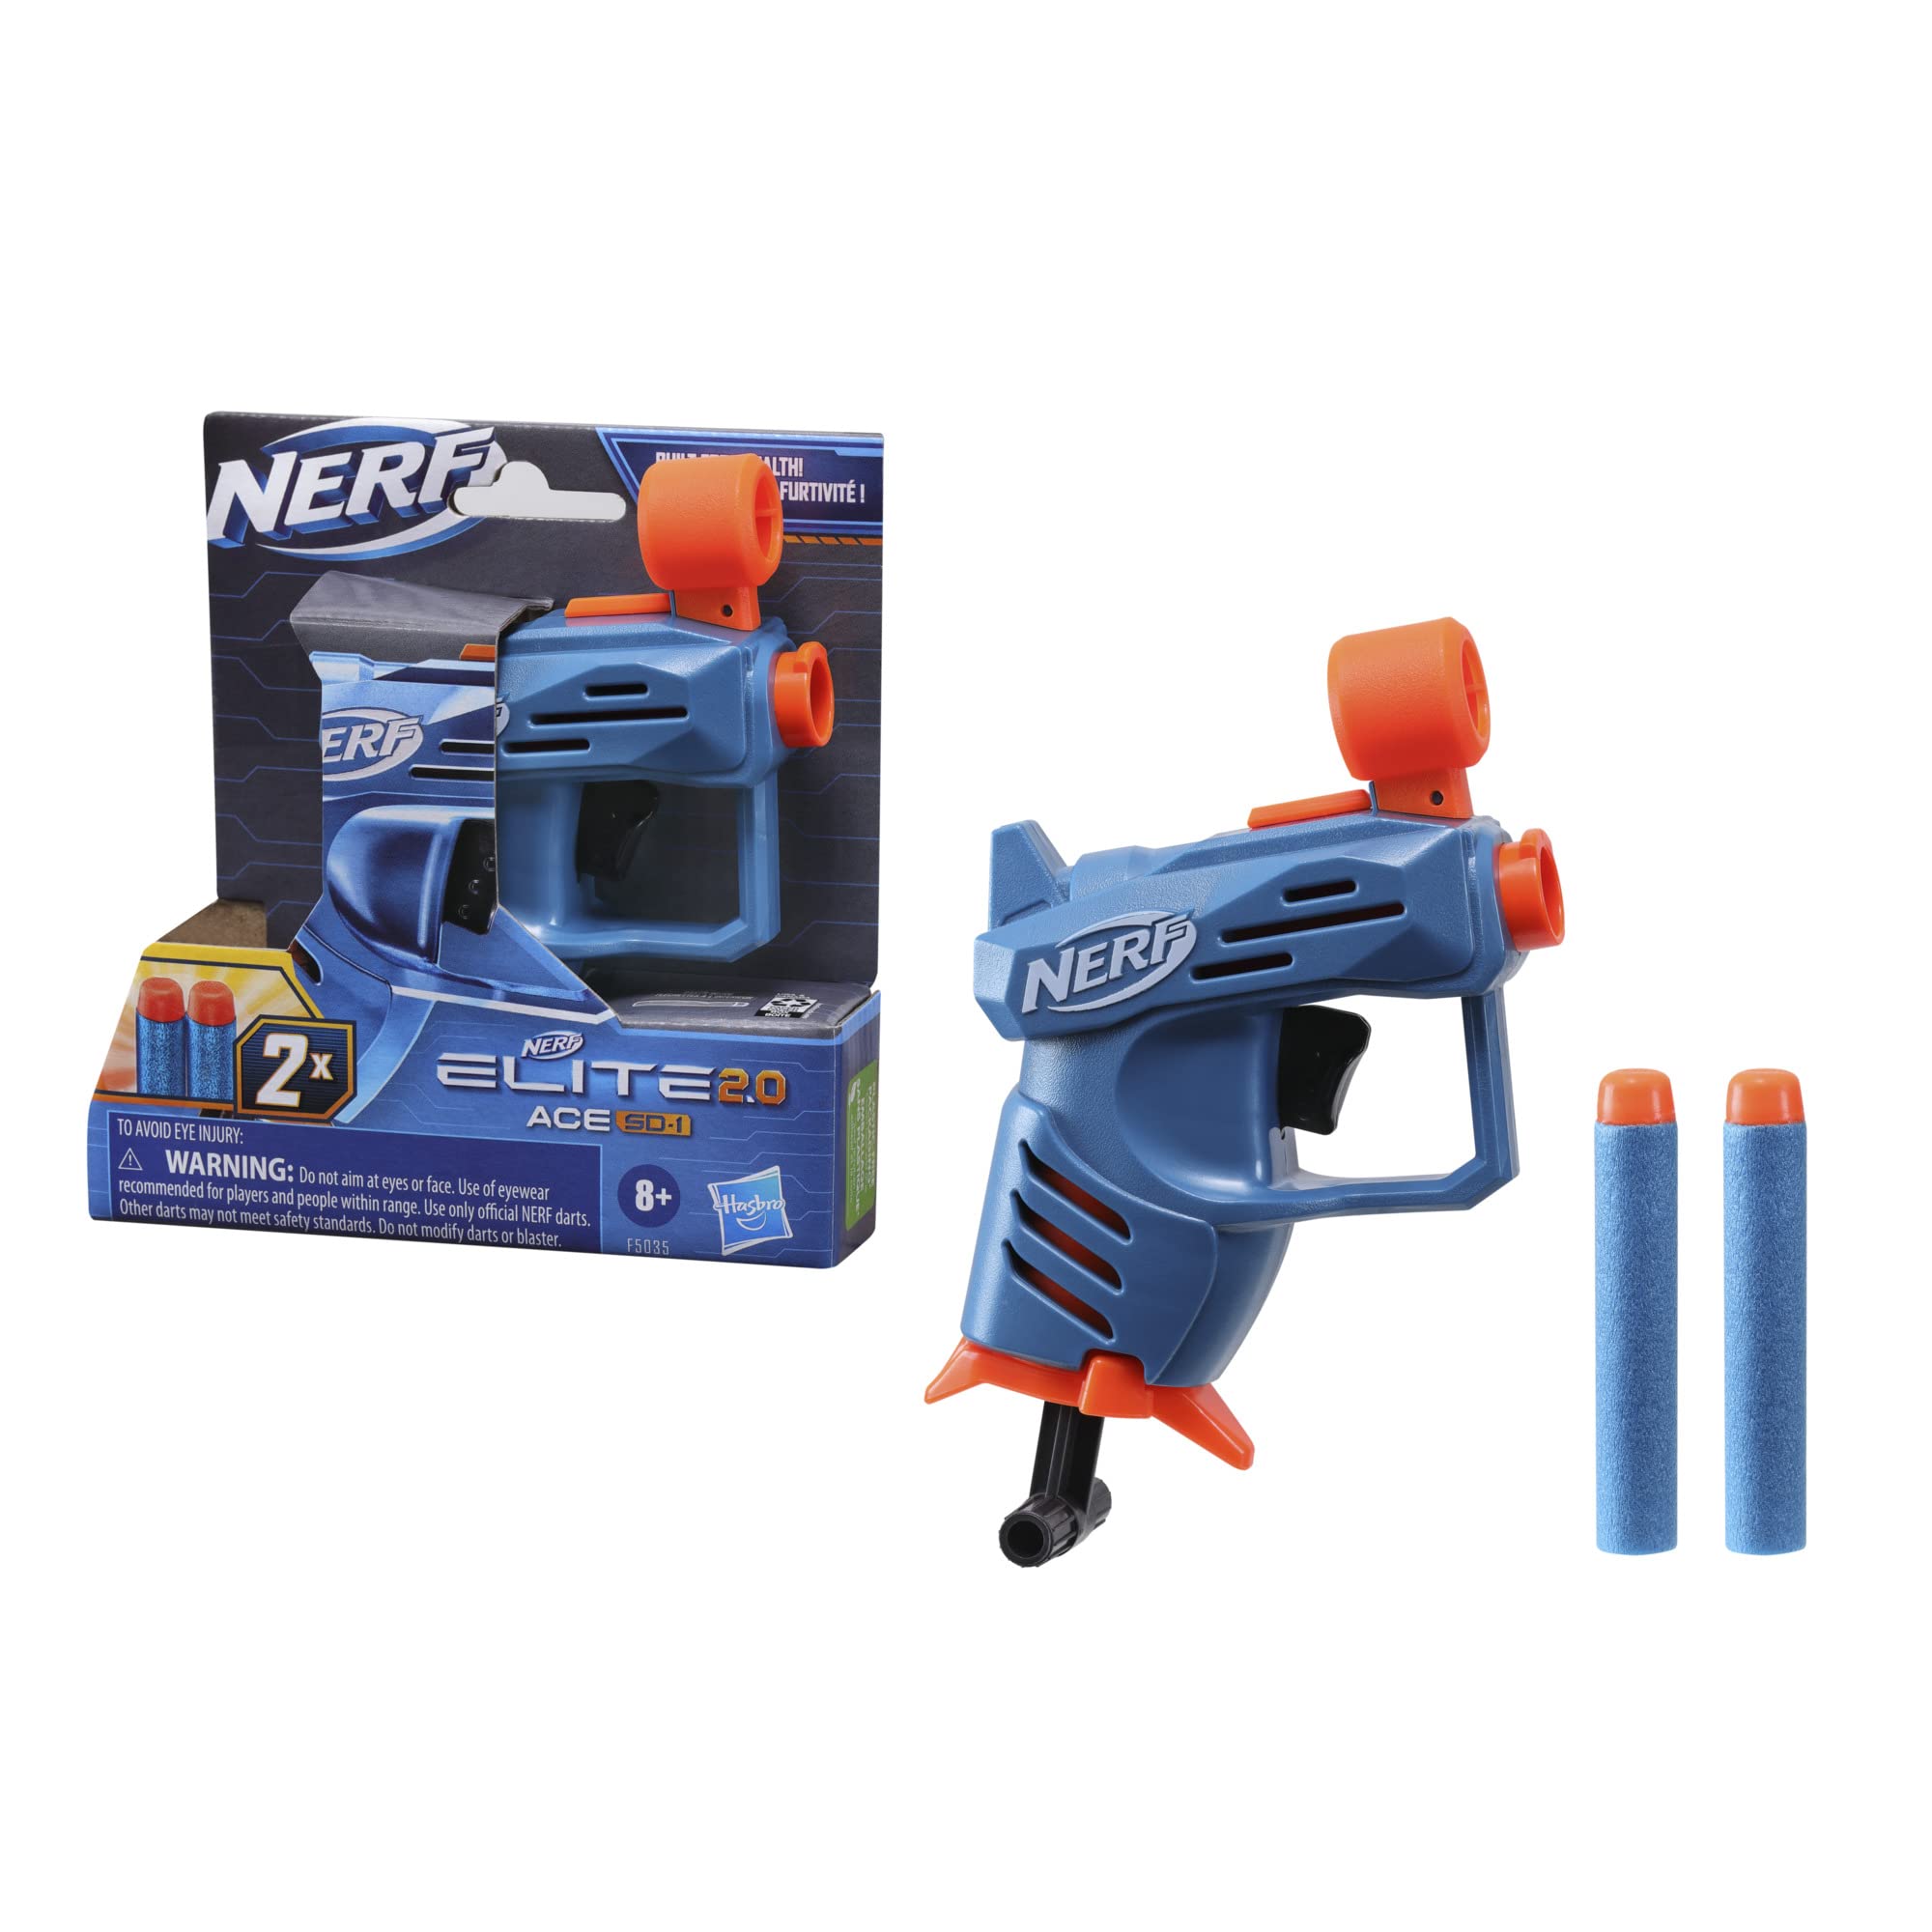 NERF Elite 2.0 Ace SD-1 Blaster, 2 Official Elite Darts, Onboard 1-Dart Storage, Stealth-Sized $2.97 + Free Shipping w/ Prime or on $35+